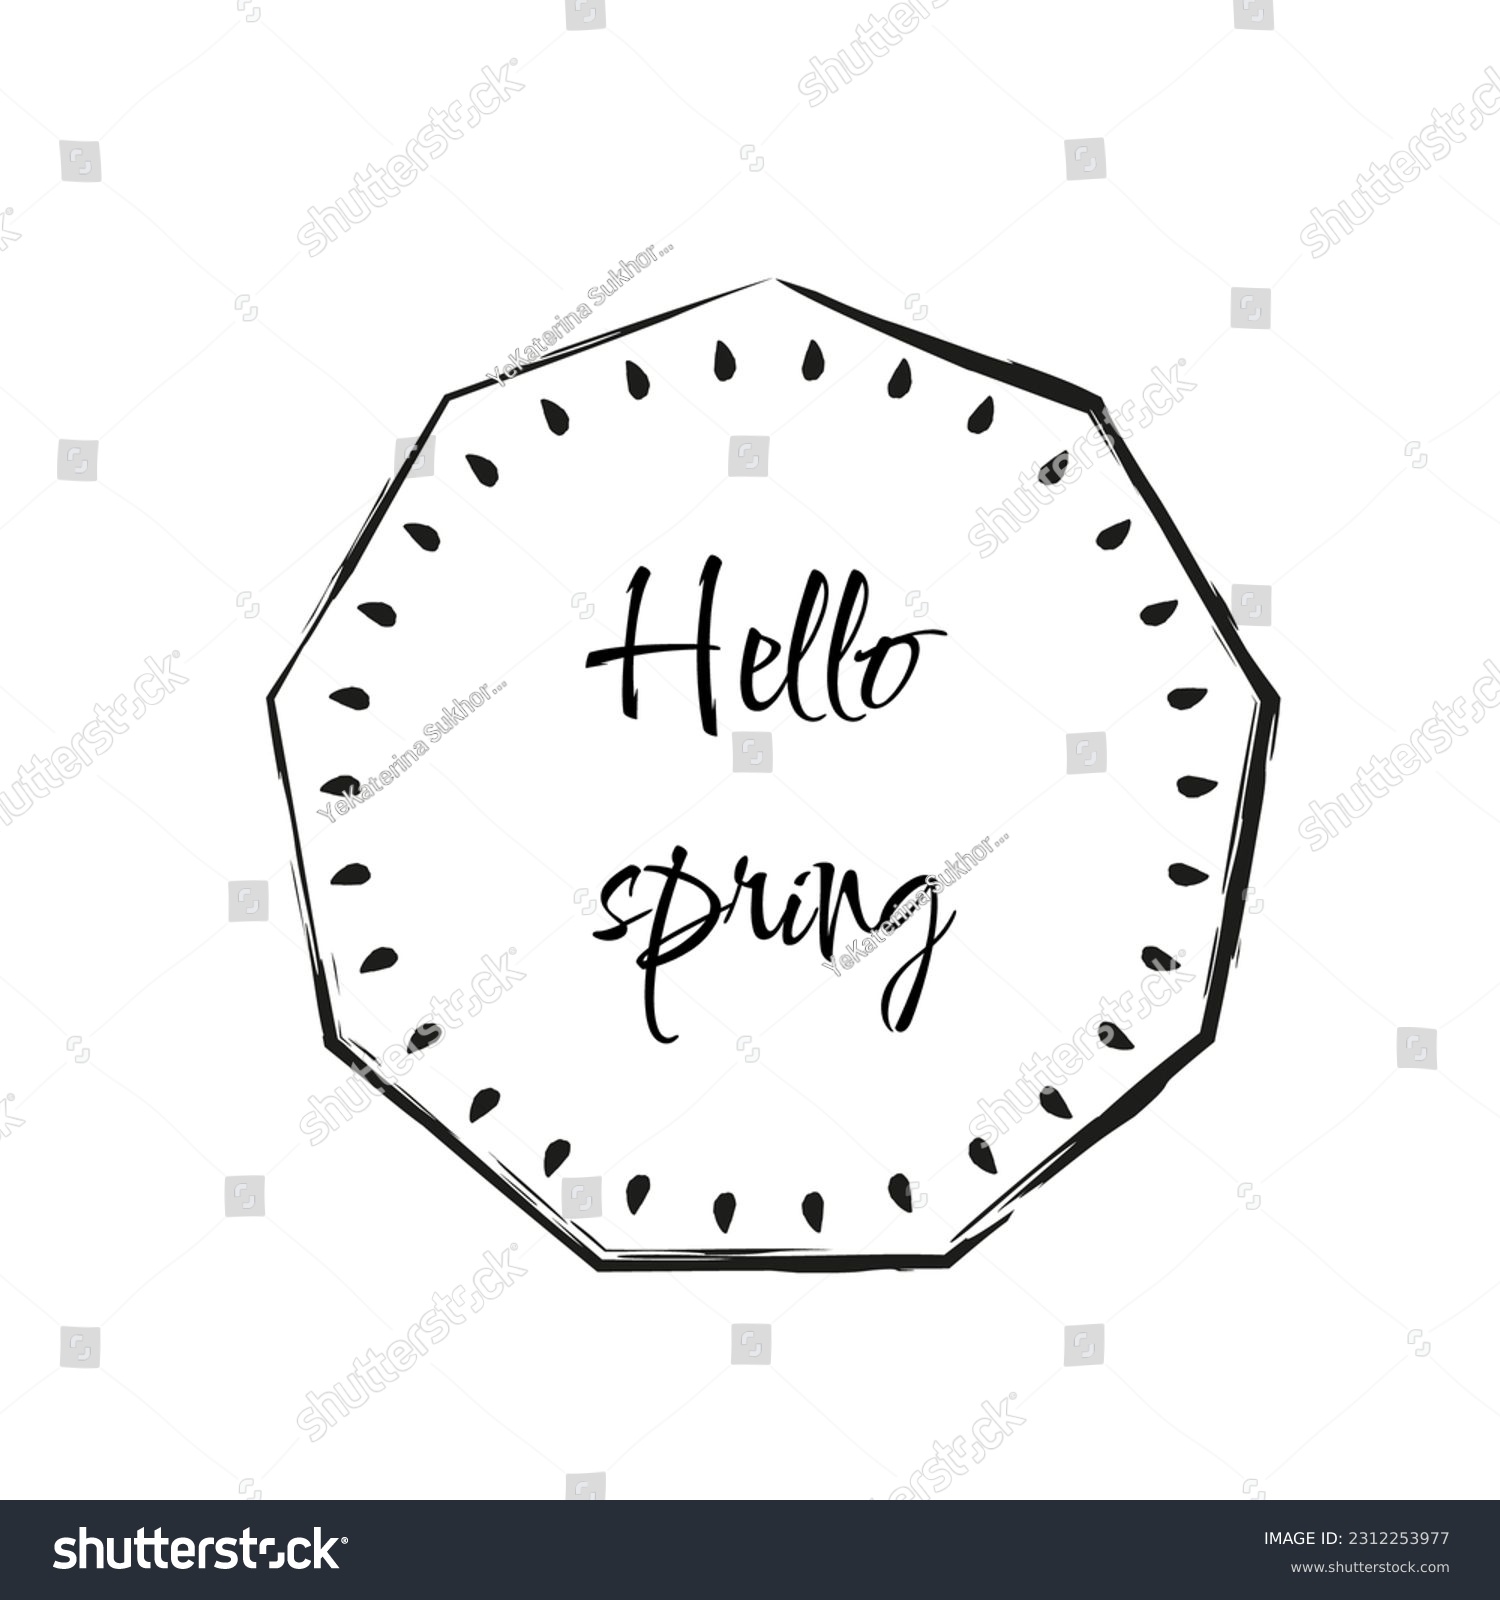 SVG of Elements Decorative Ornaments Bundle Flower svg Flourish Frame Swoosh. Greek key decorative border, constructed from continuous lines, shaped into a repeated motif. Hello spring svg